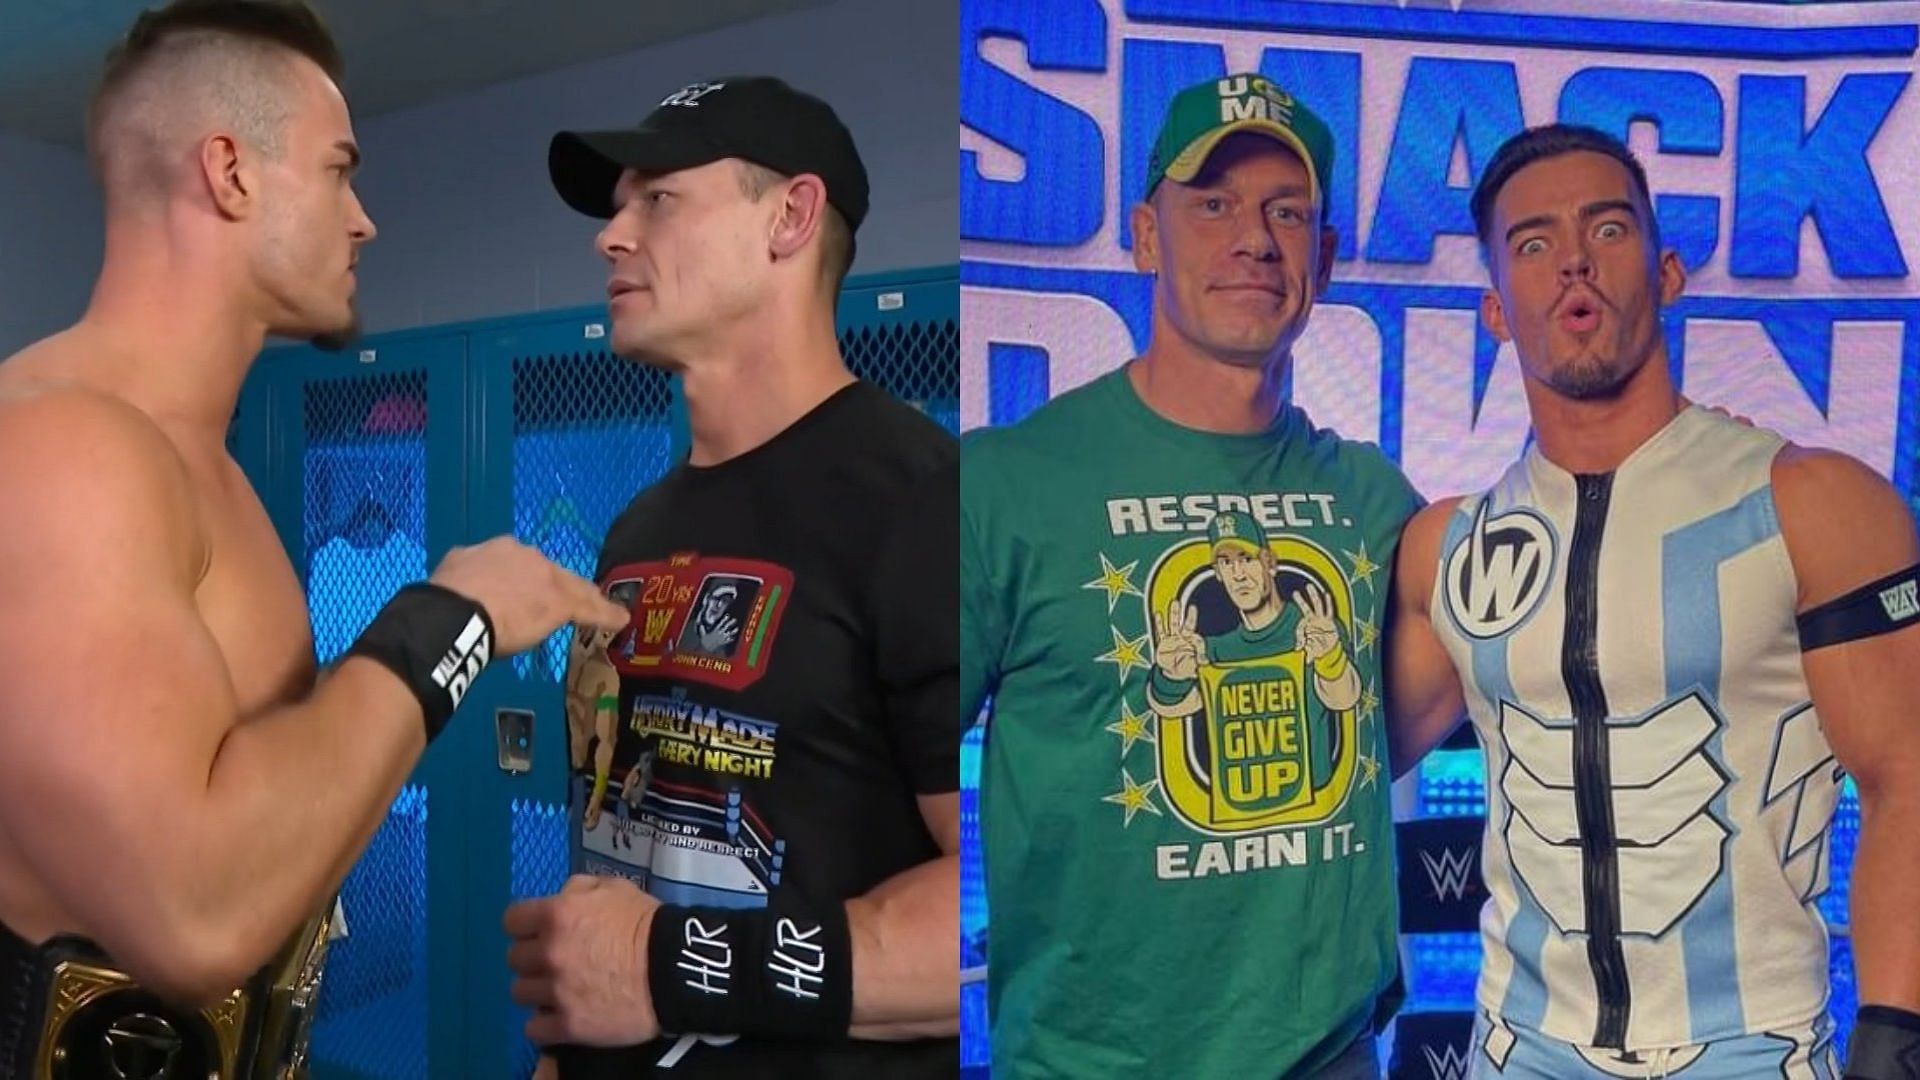 John Cena and Austin Theory could possibly face each other this year